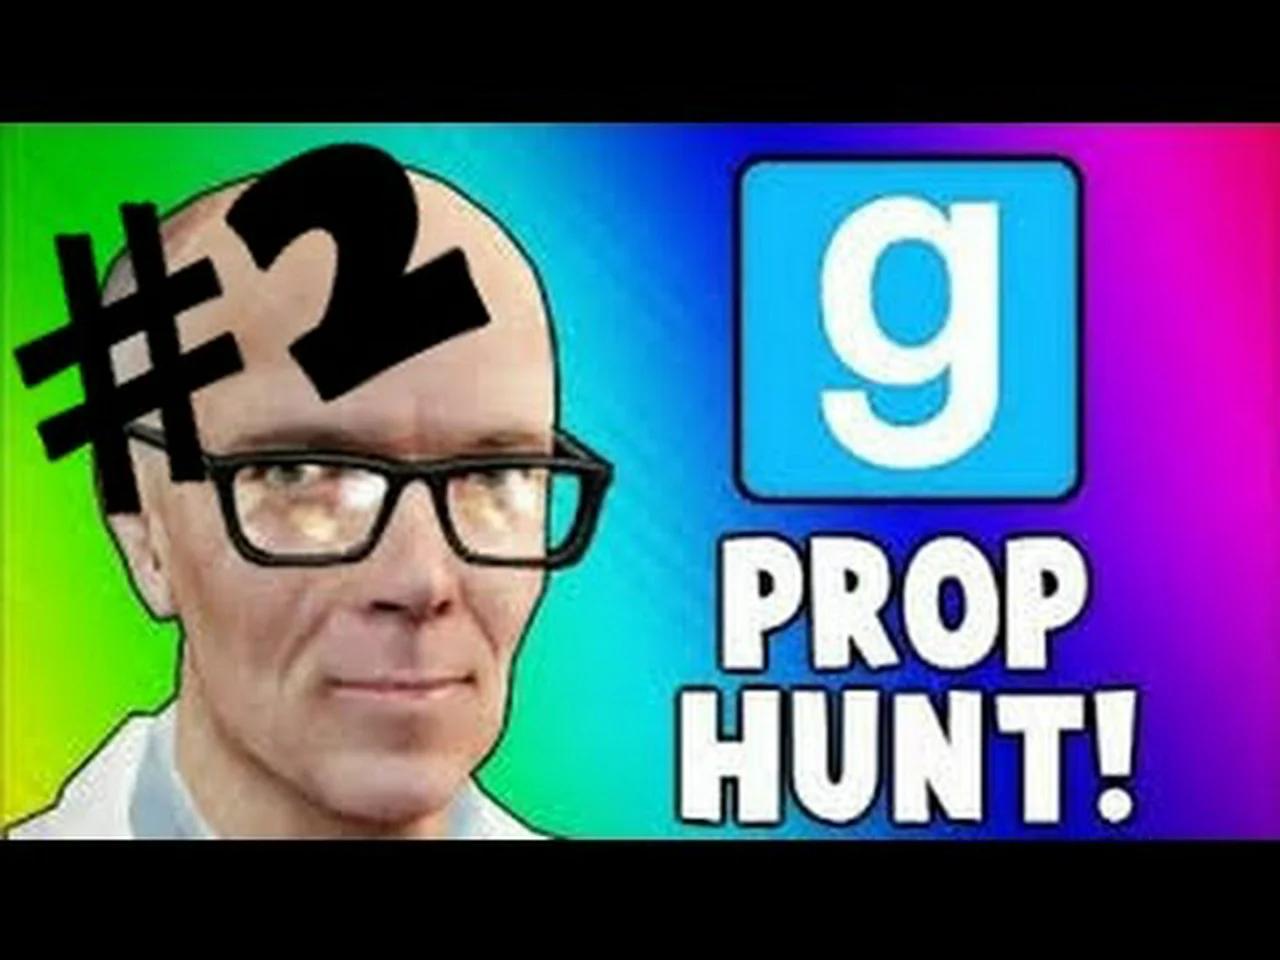 Prop hunt not on steam фото 40